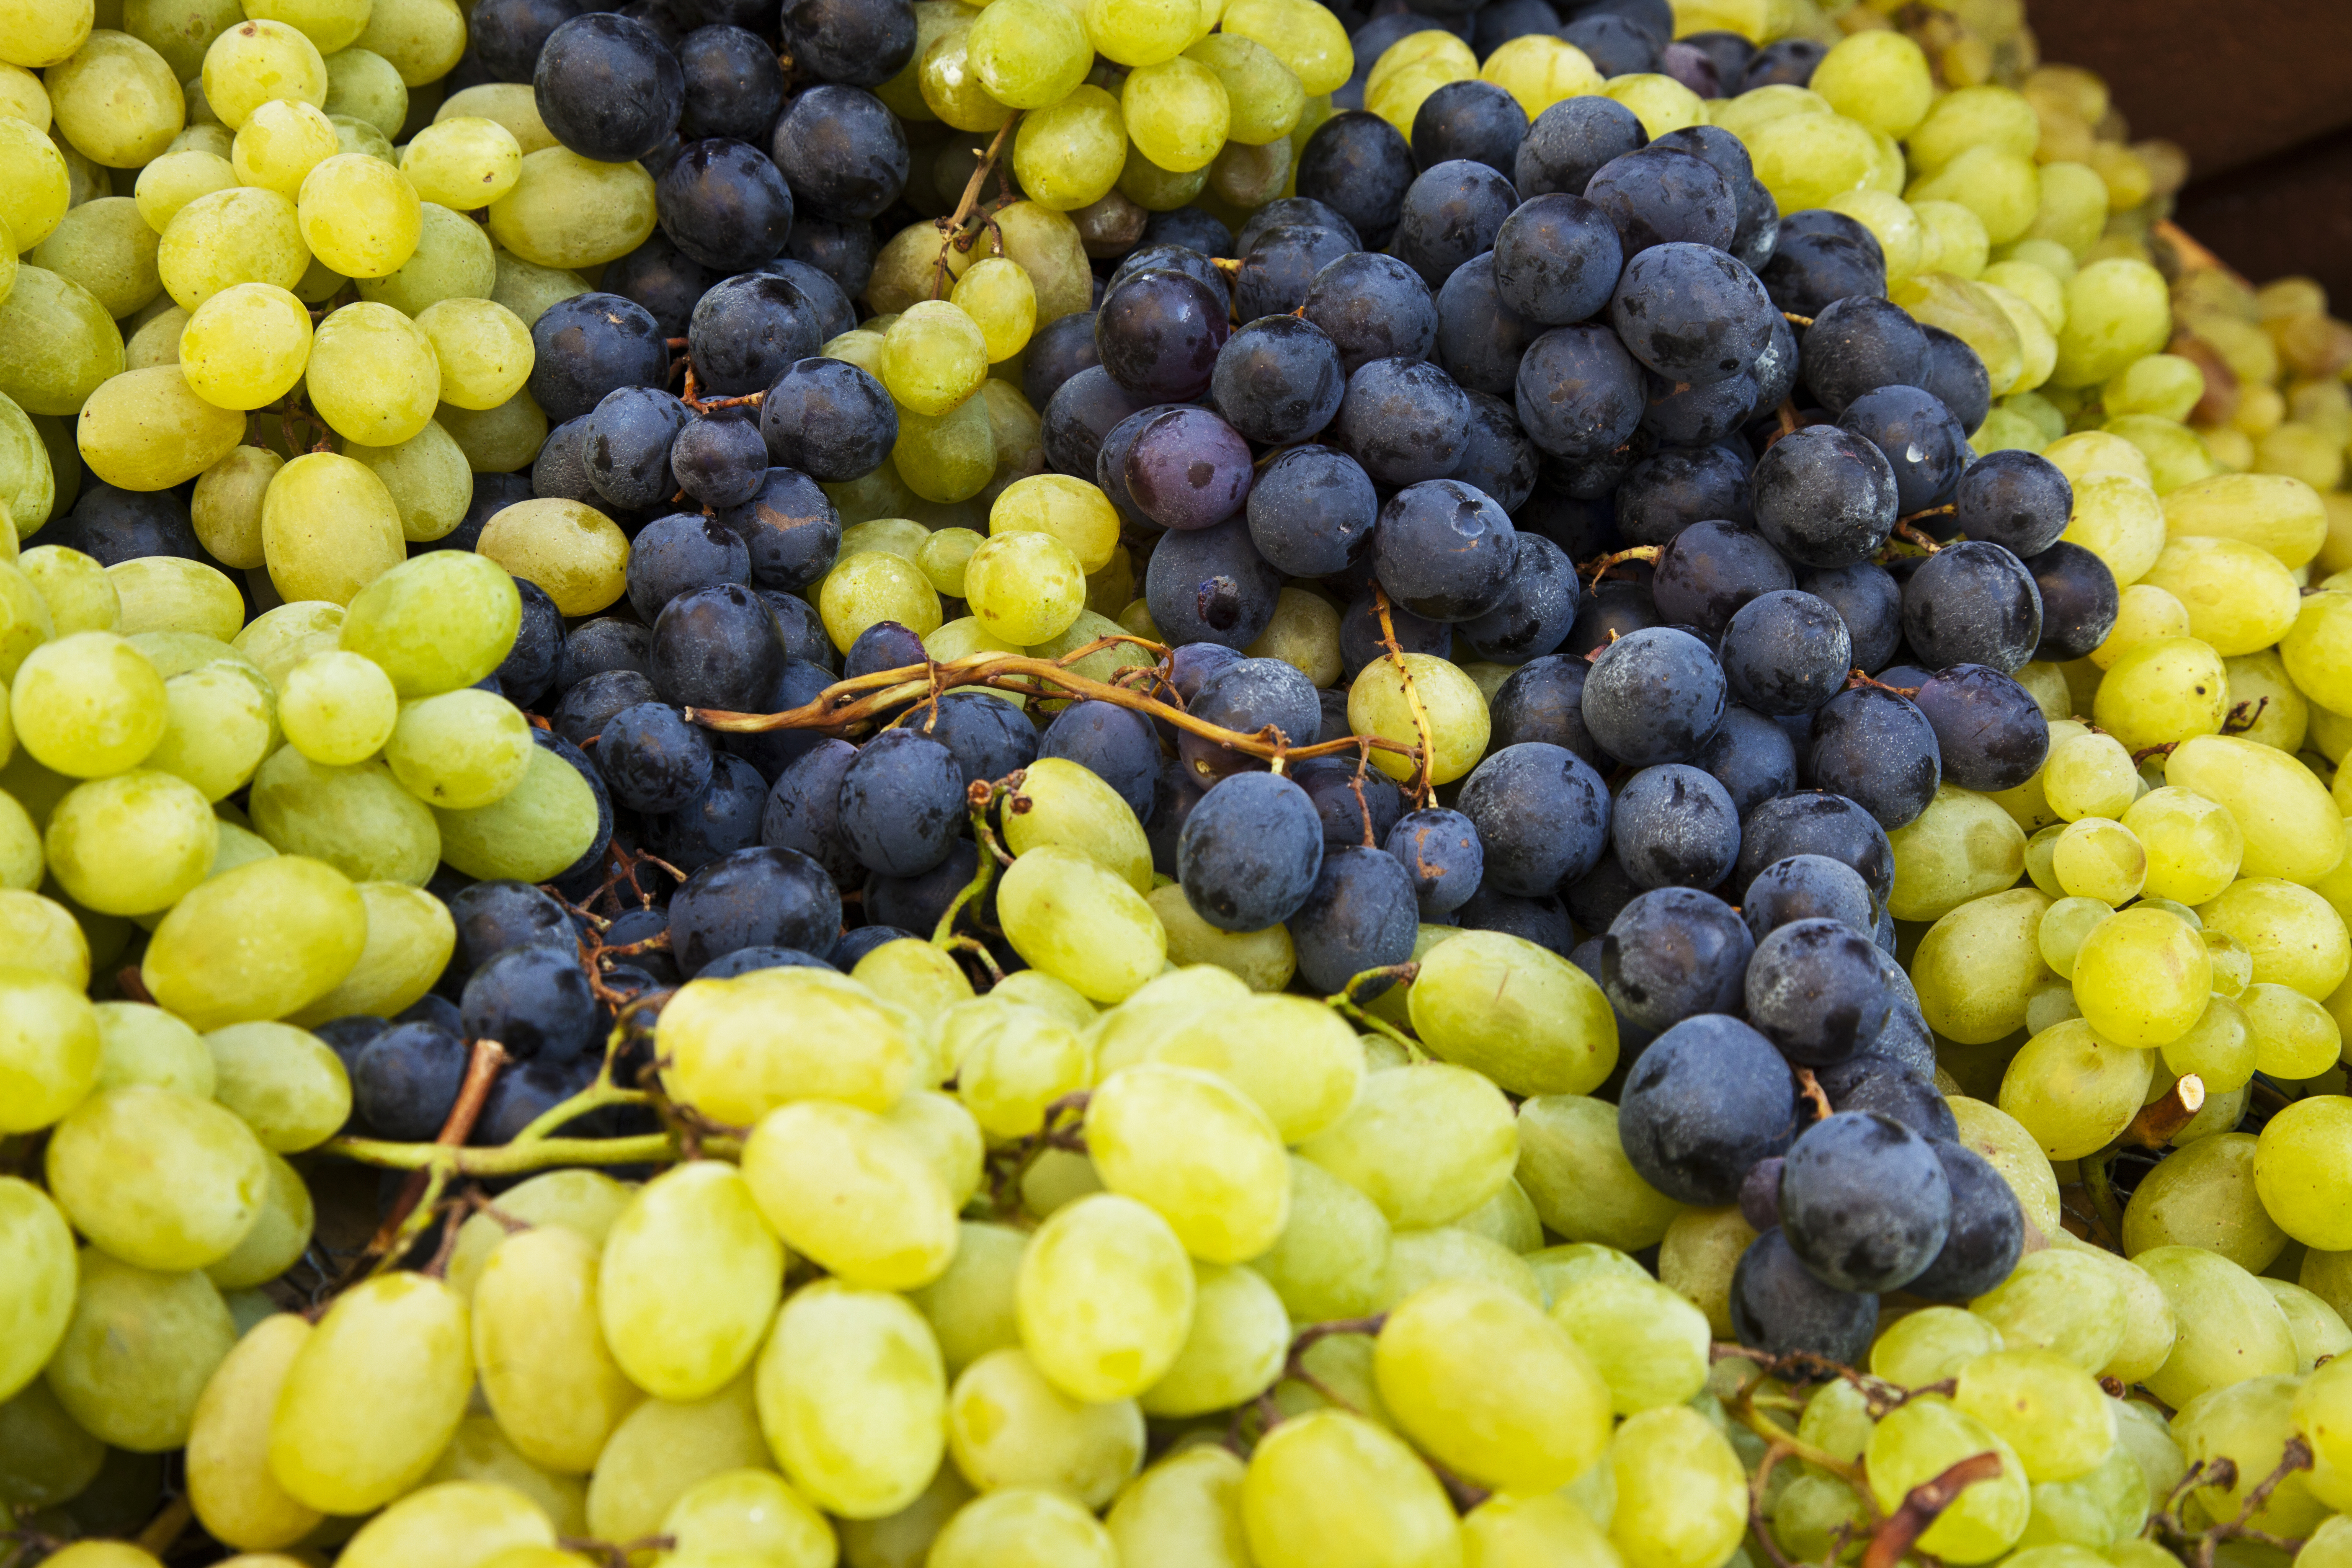 “Grapes need a long hot day to develop their flavors, and they concentrate all their sugars in August,” says Whole Foods associate produce coordinator Chris Romano. “We will see all sorts of varieties from champagne to cotton candy grapes.